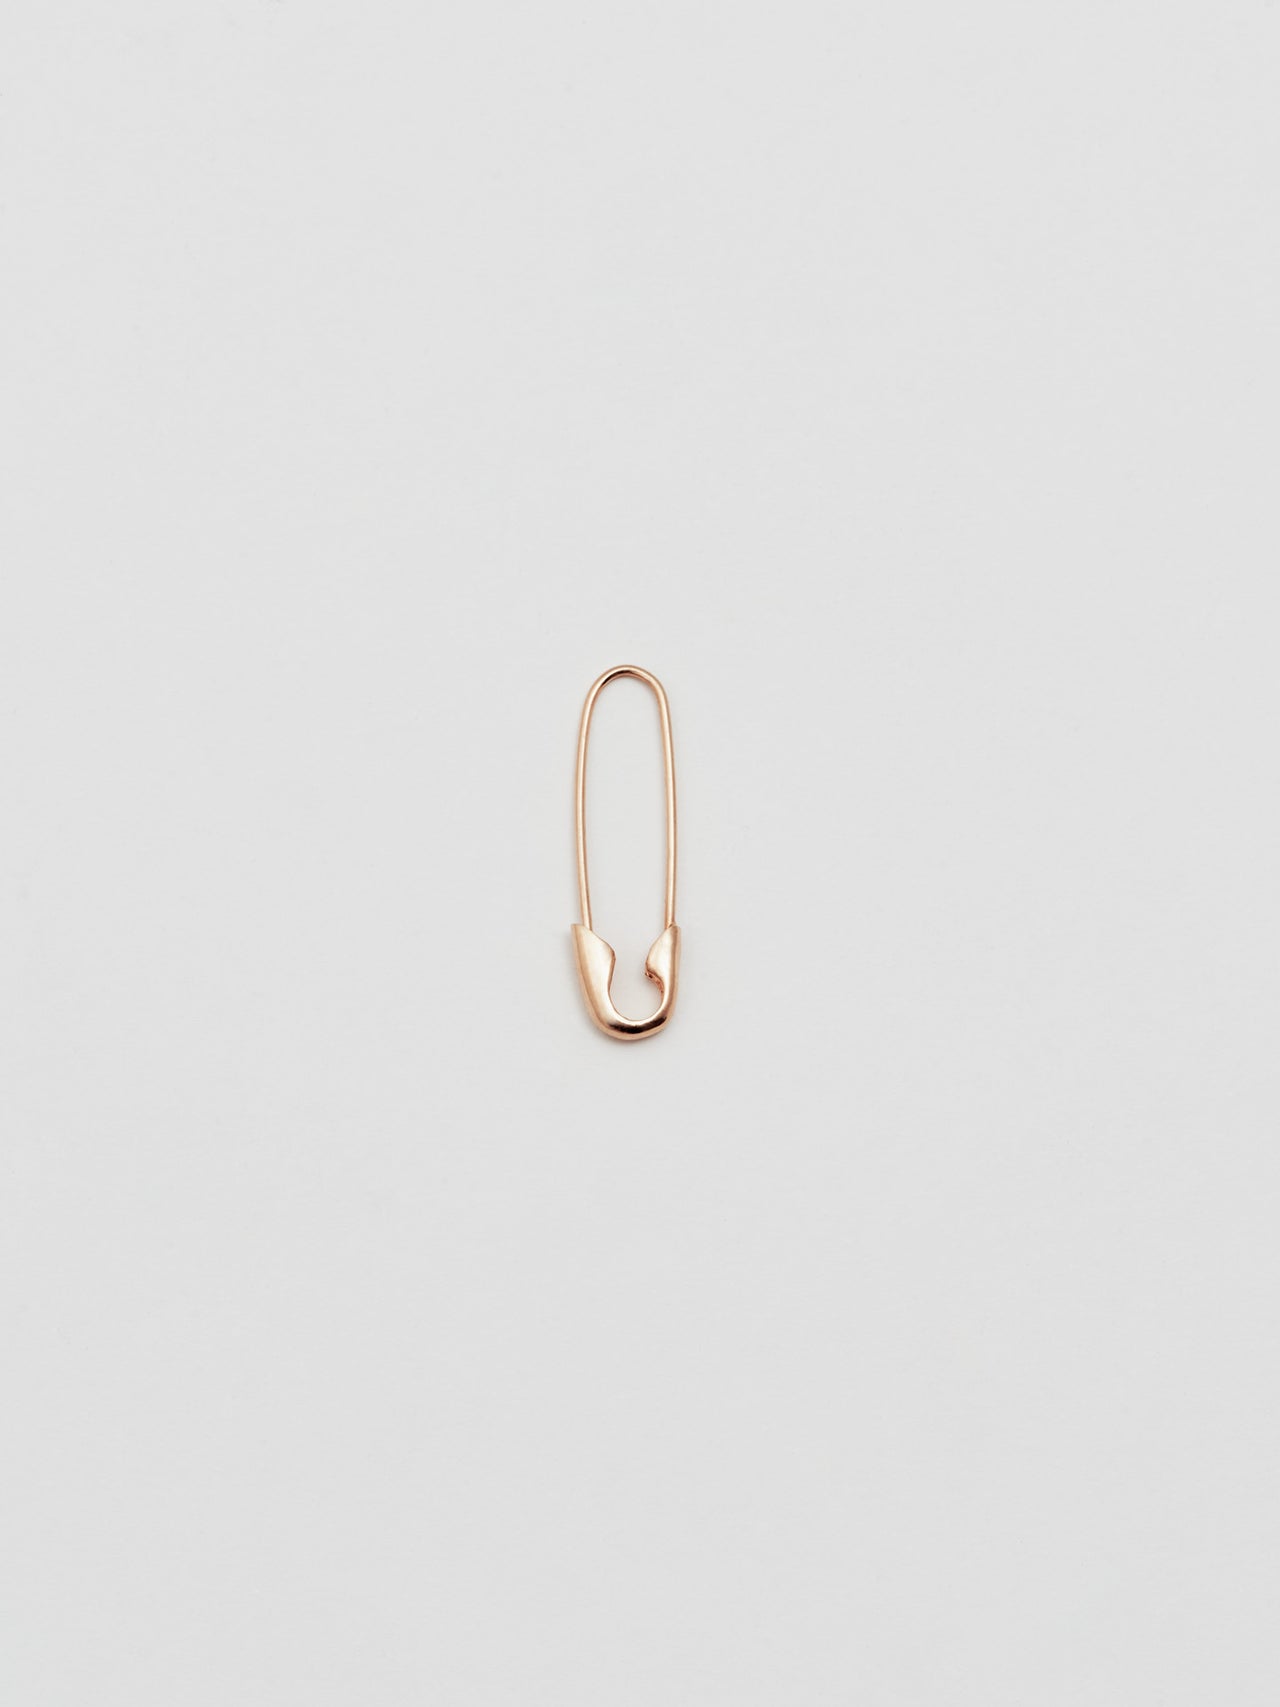 Product shot of the Safety Pin Earring (14Kt Shiny Rose Gold Safety Pin Earring Length: 21.35mm) Background: Grey backdrop